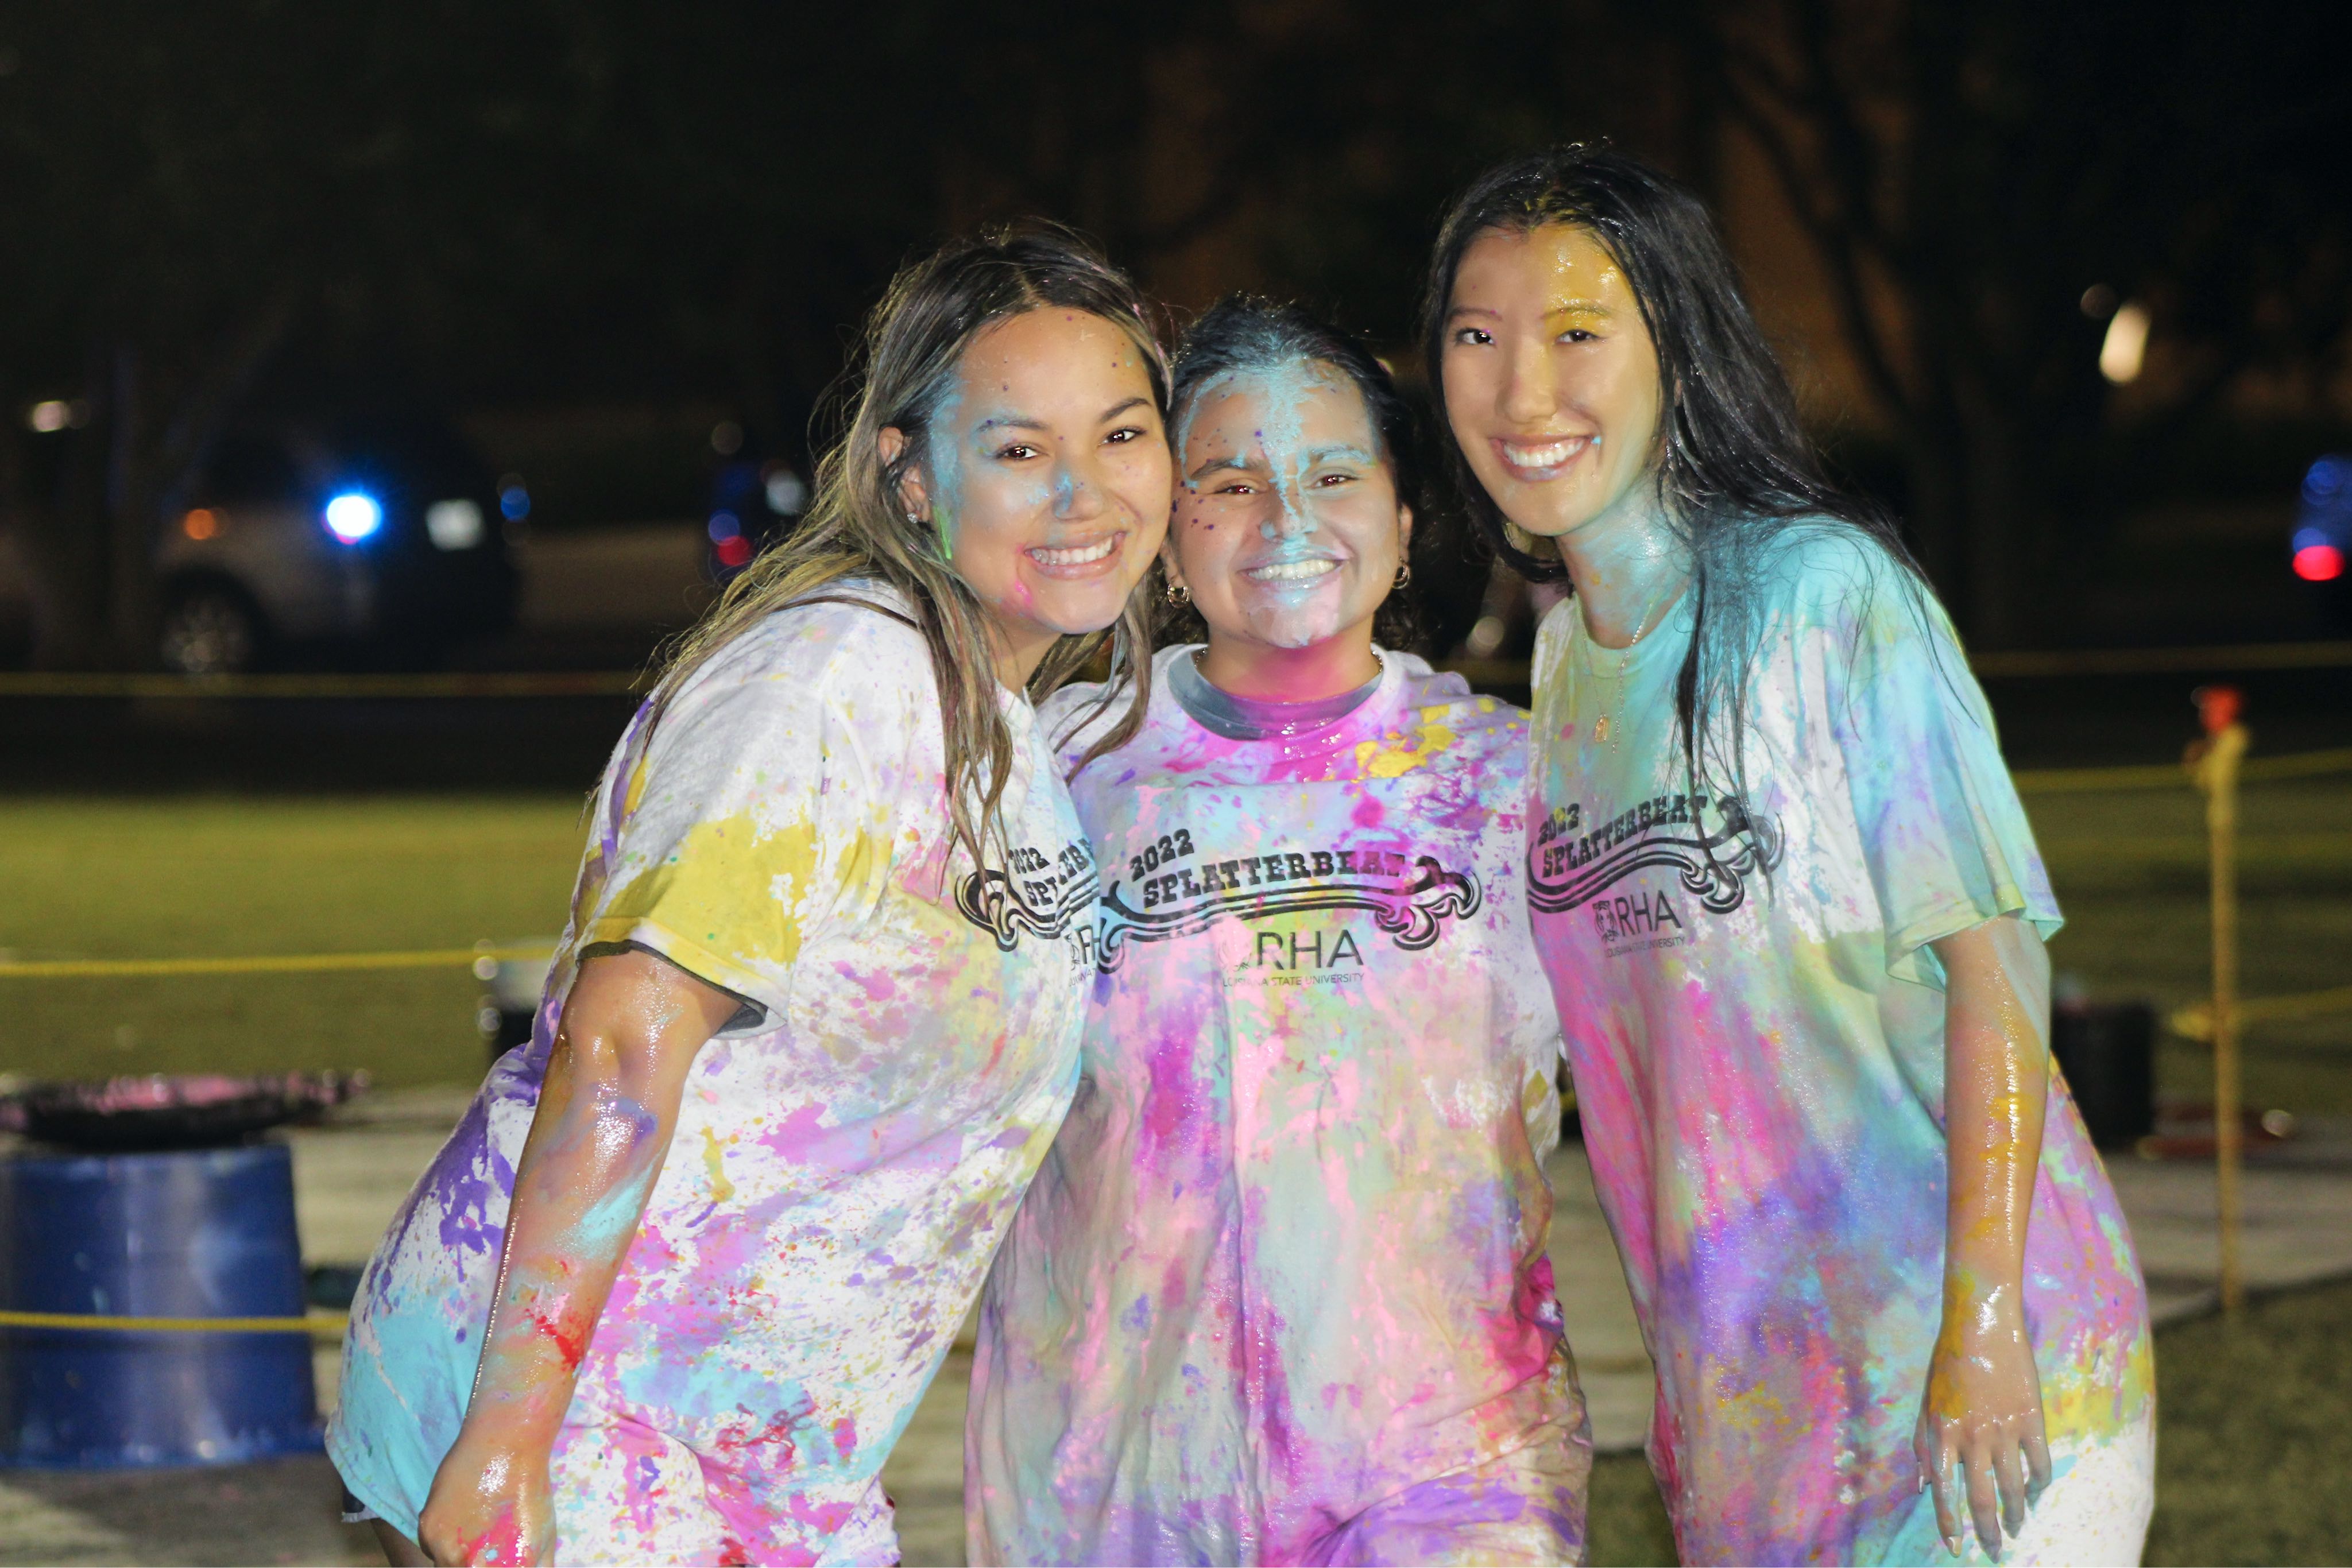 Students at the Residence Hall Association's annual Splatterbeat. 